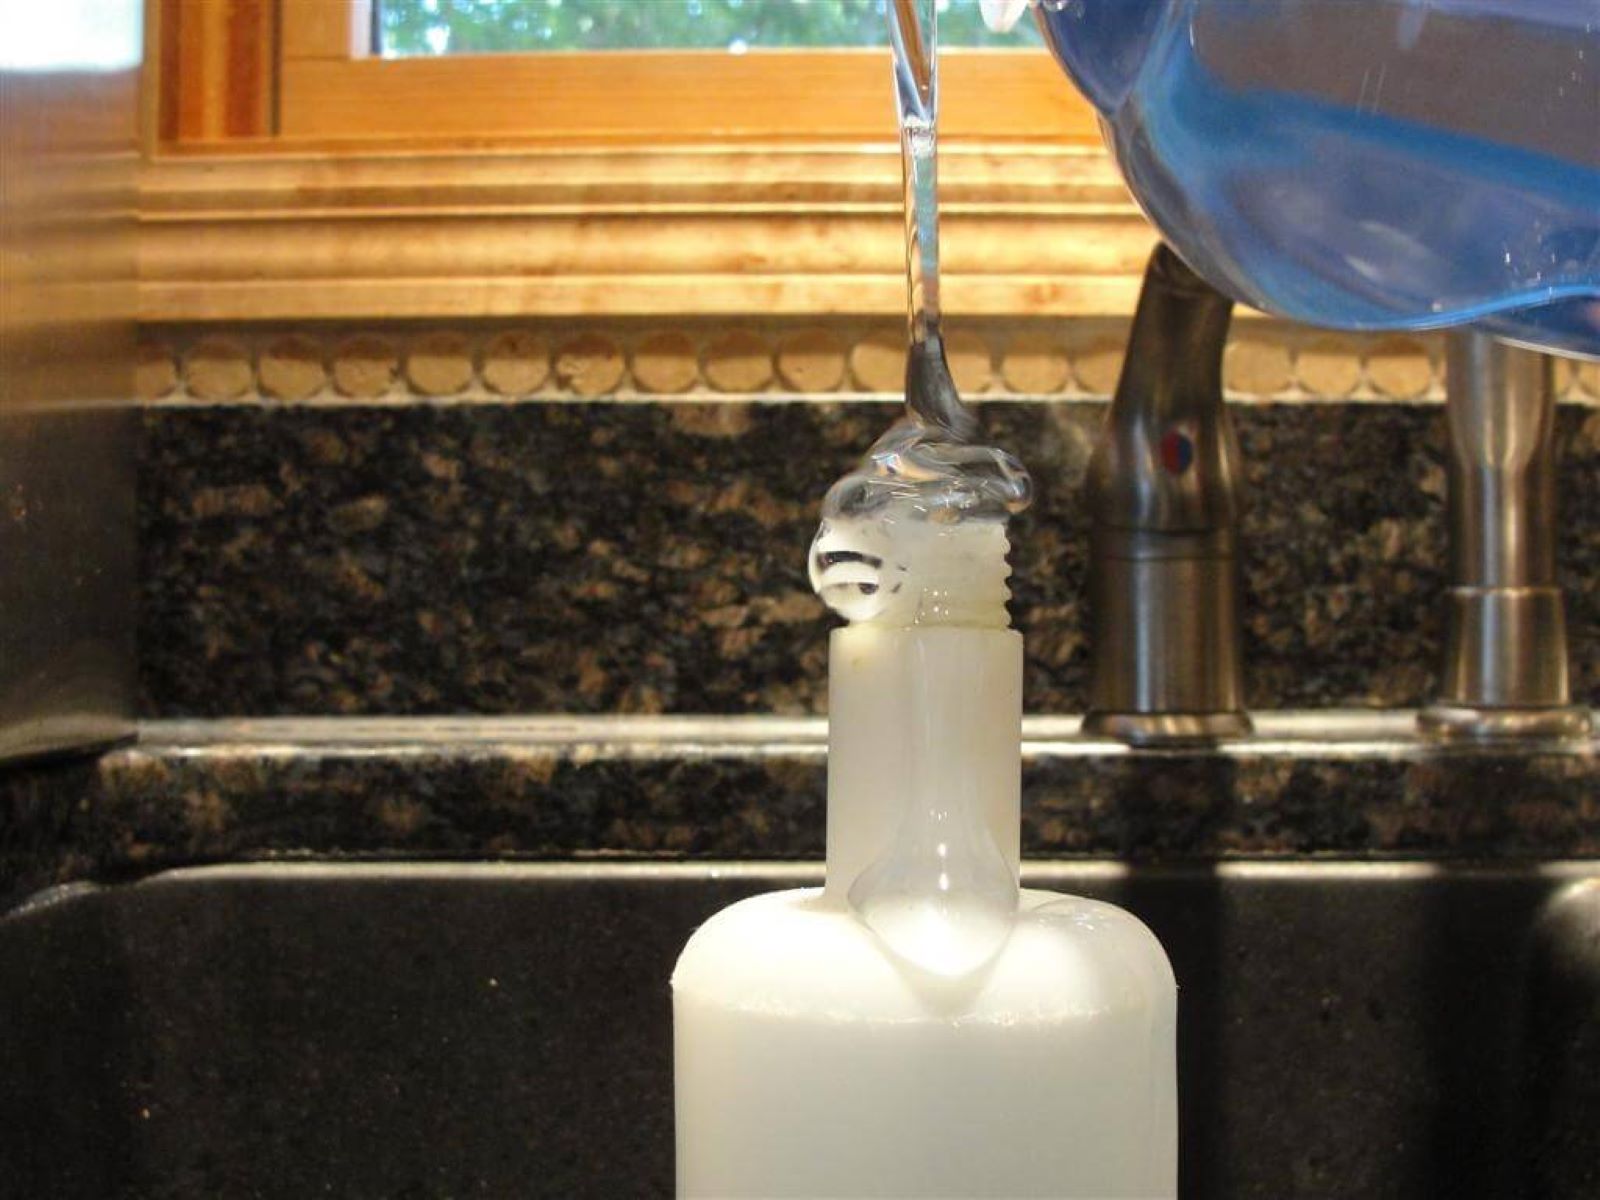 How To Put Soap In A Soap Dispenser